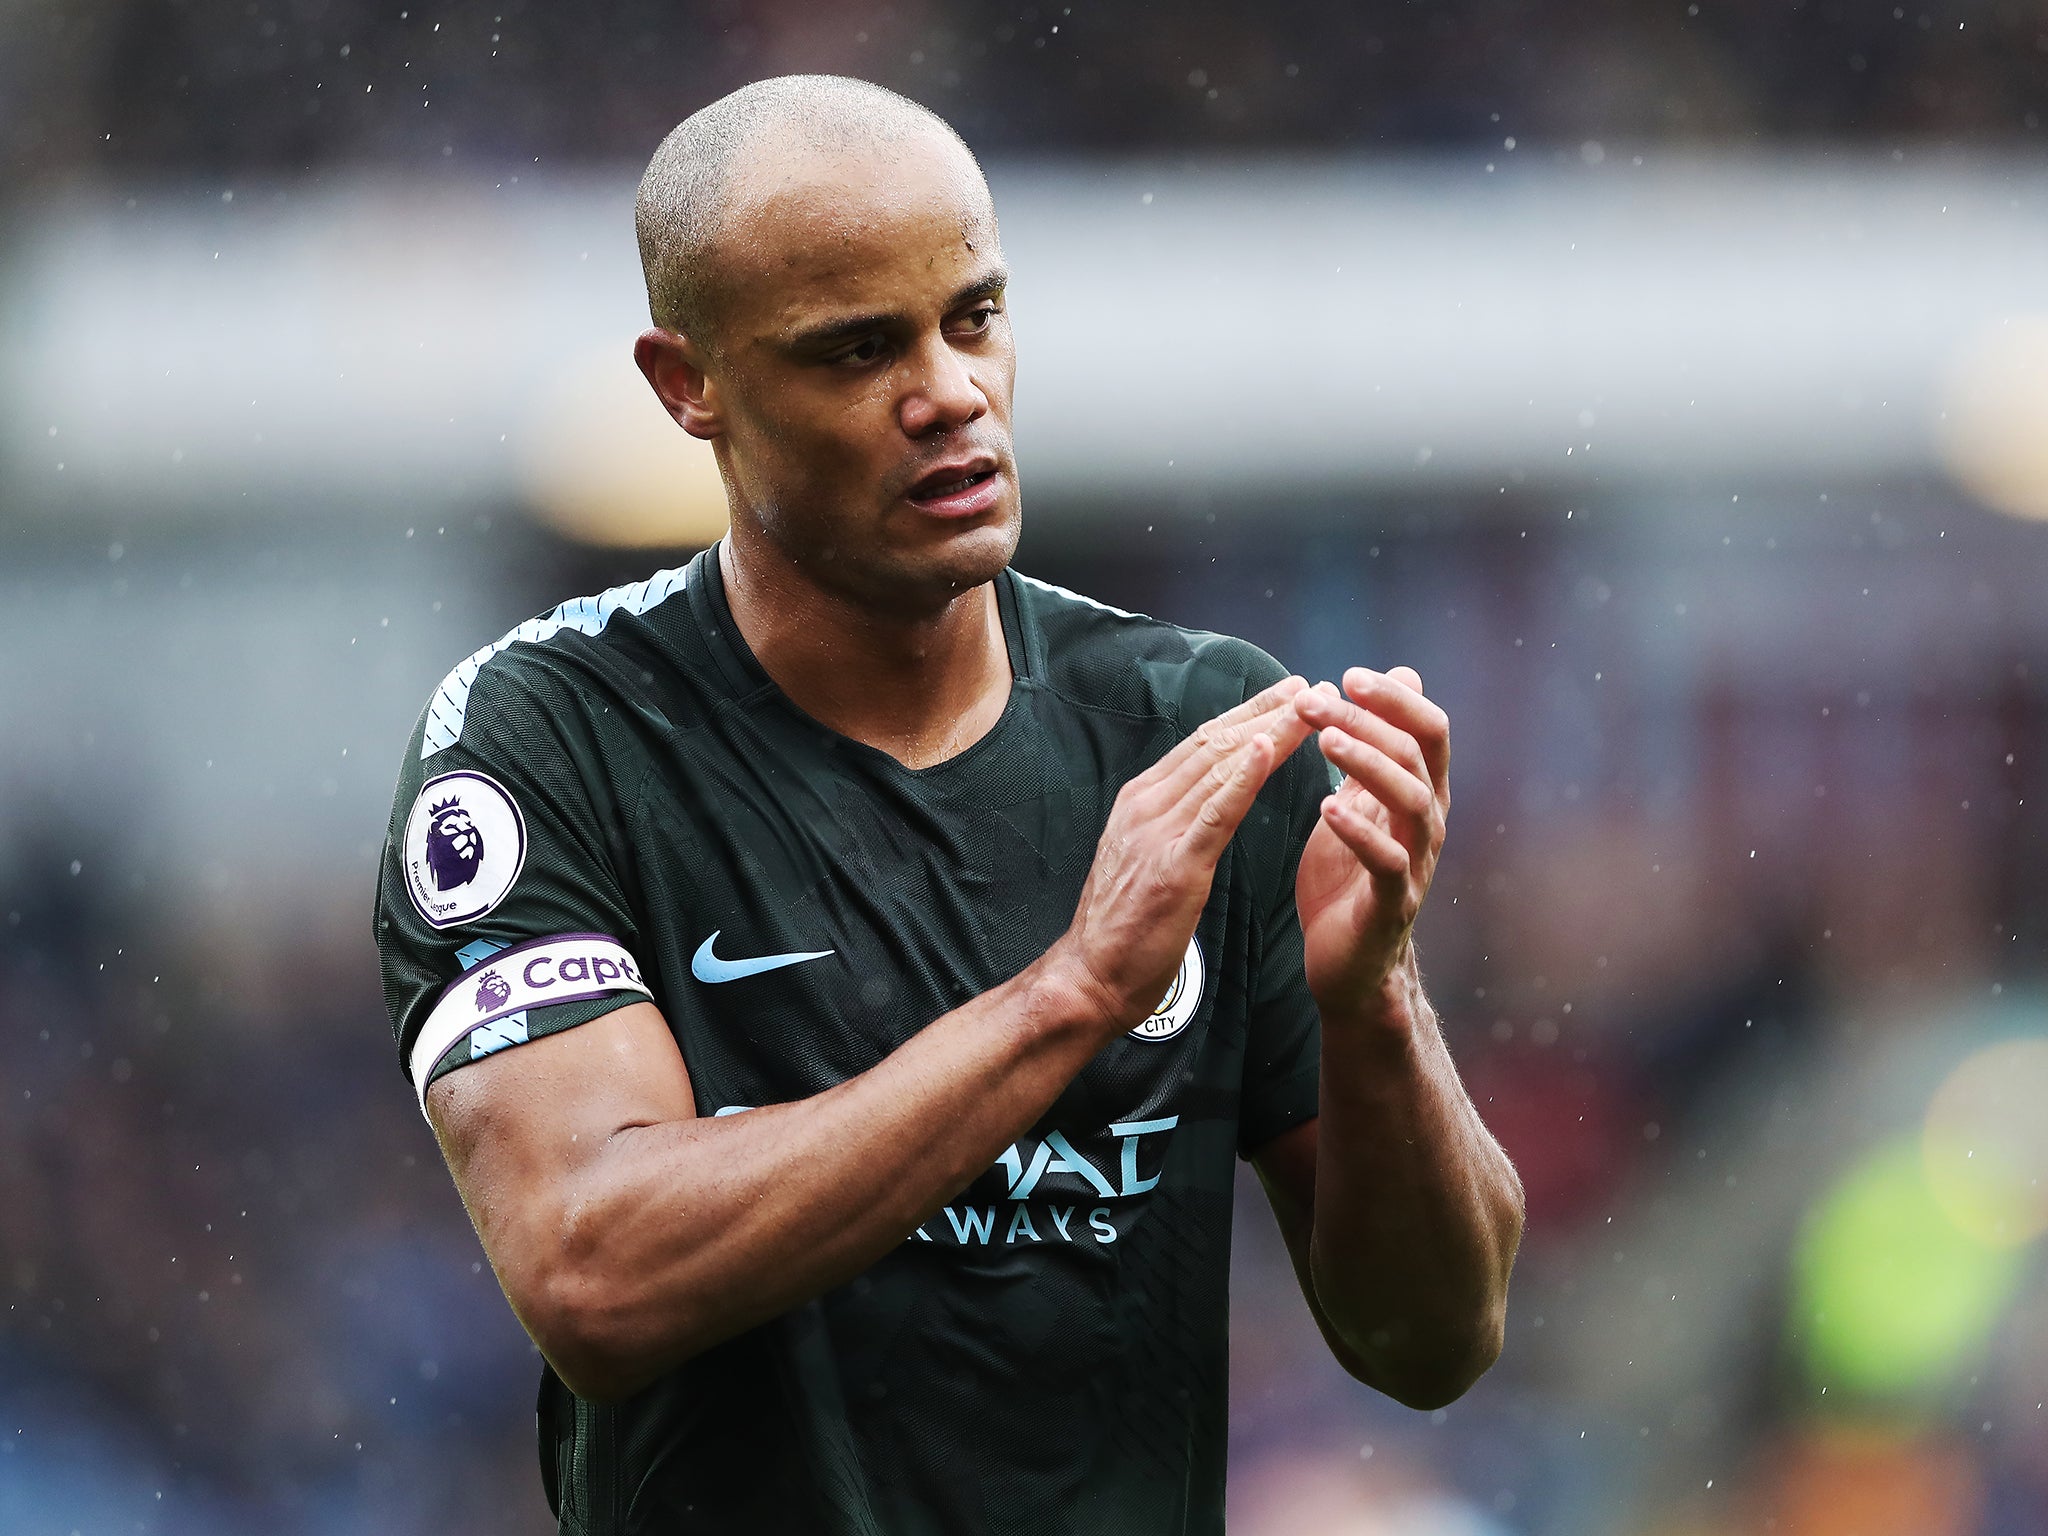 Vincent Kompany believes Manchester City are good enough to win the Champions League